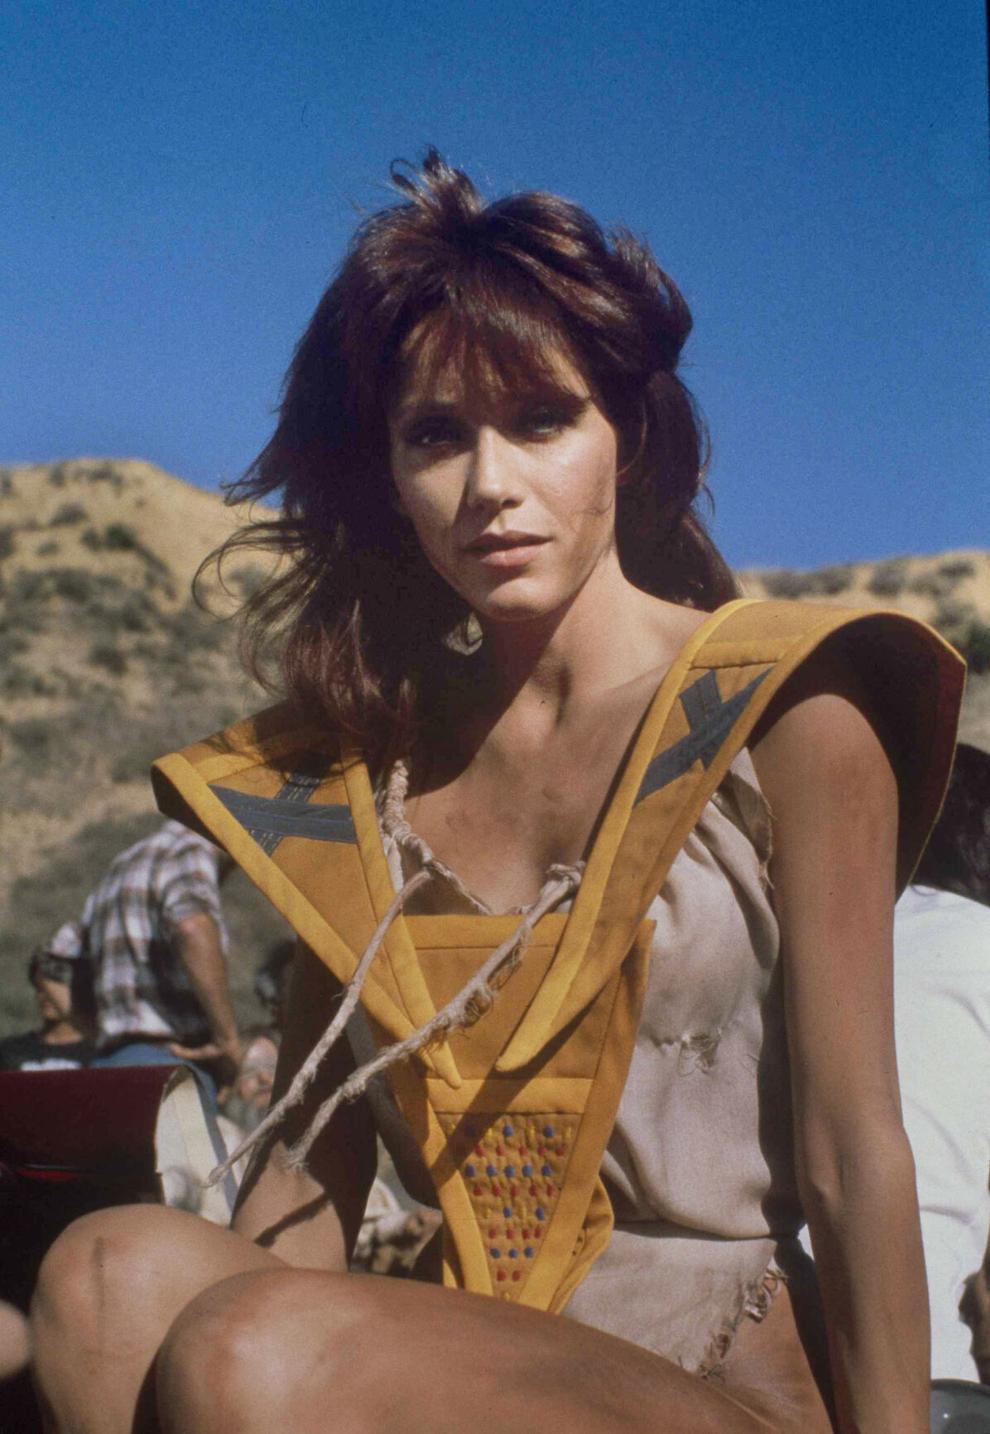 Tanya Roberts Bond Girl And That 70s Show Actress Hospitalized In Poor Condition